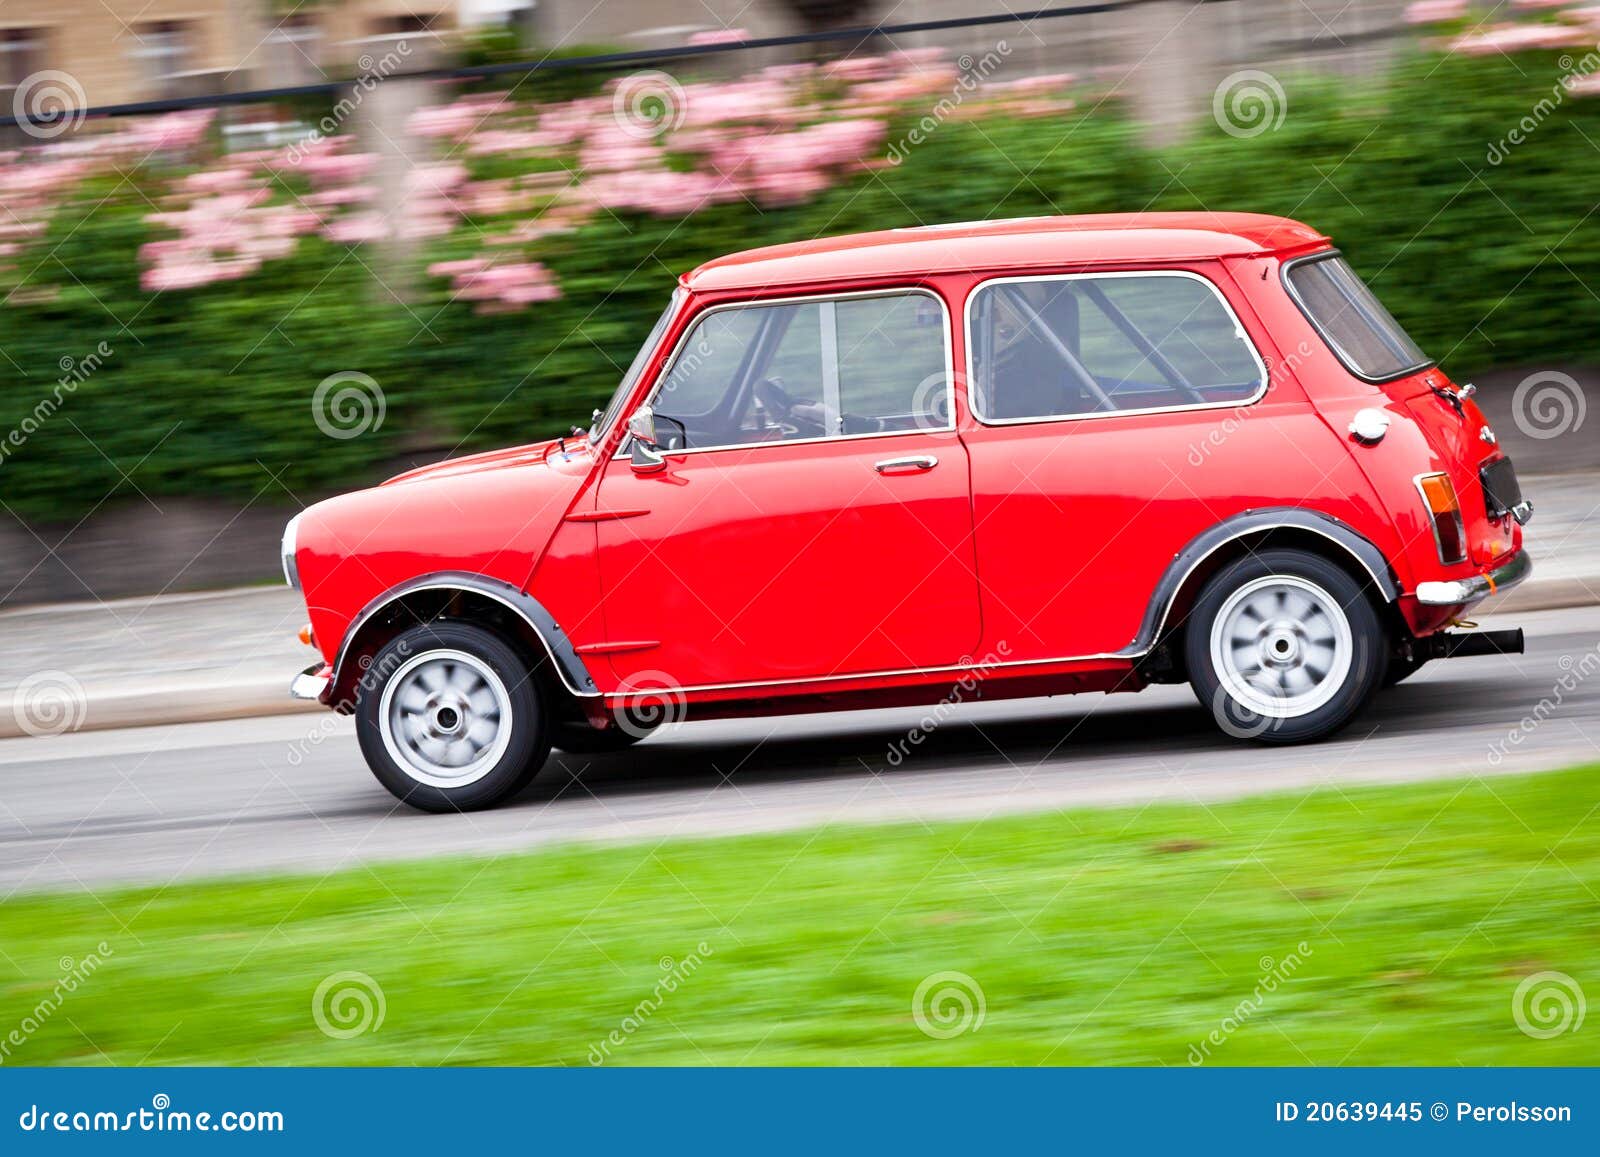 Small red car stock image. Image of transportation, fiat - 20639445